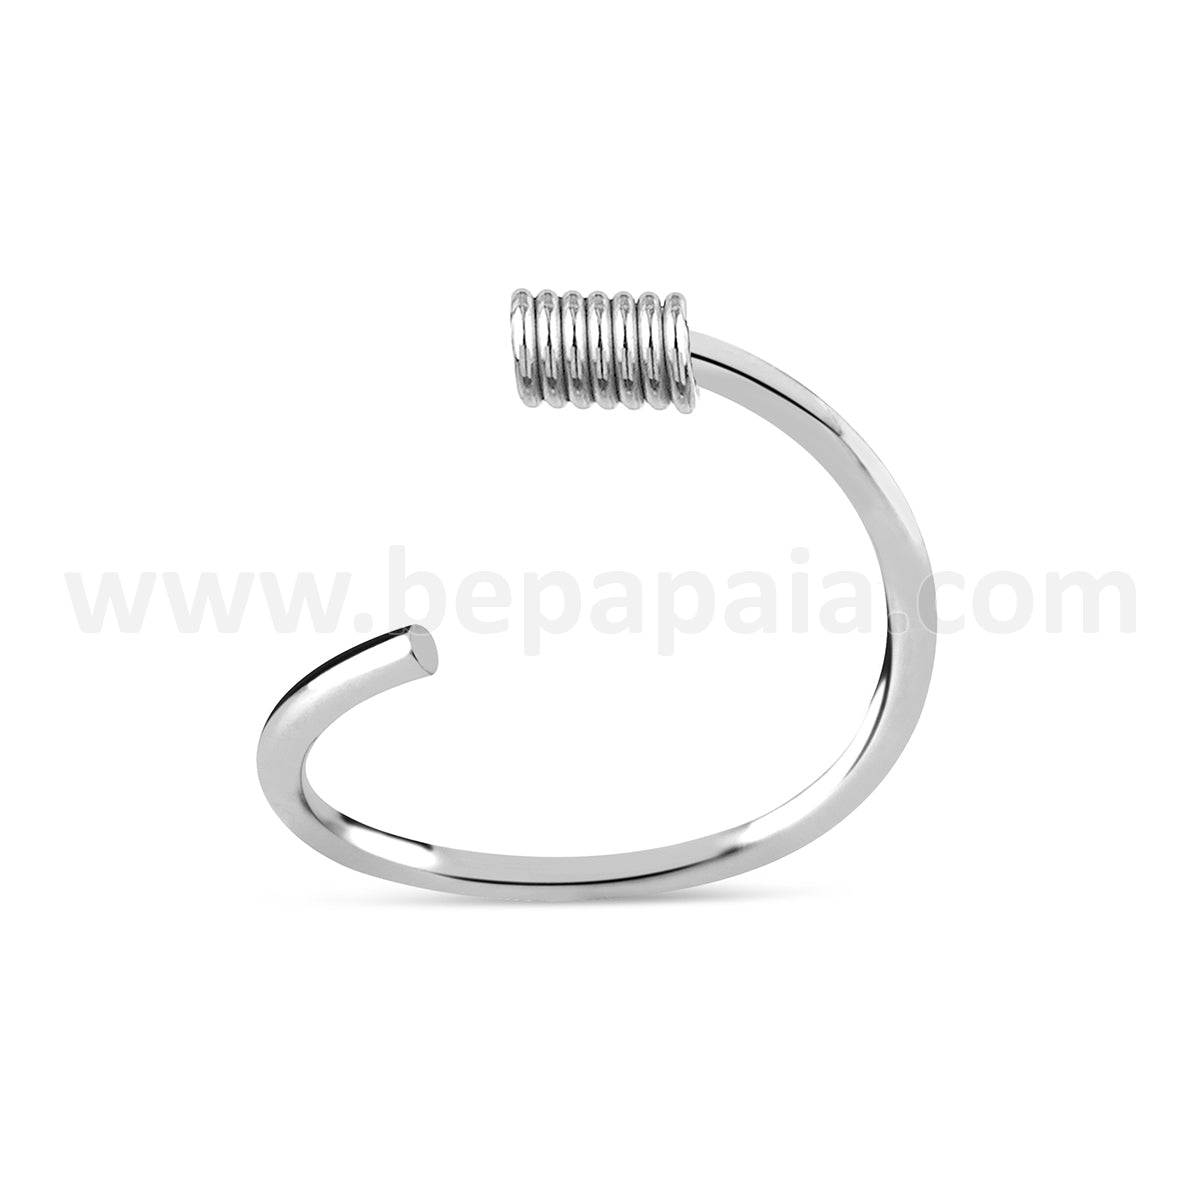 Surgical steel flexible nose ring with wire closing